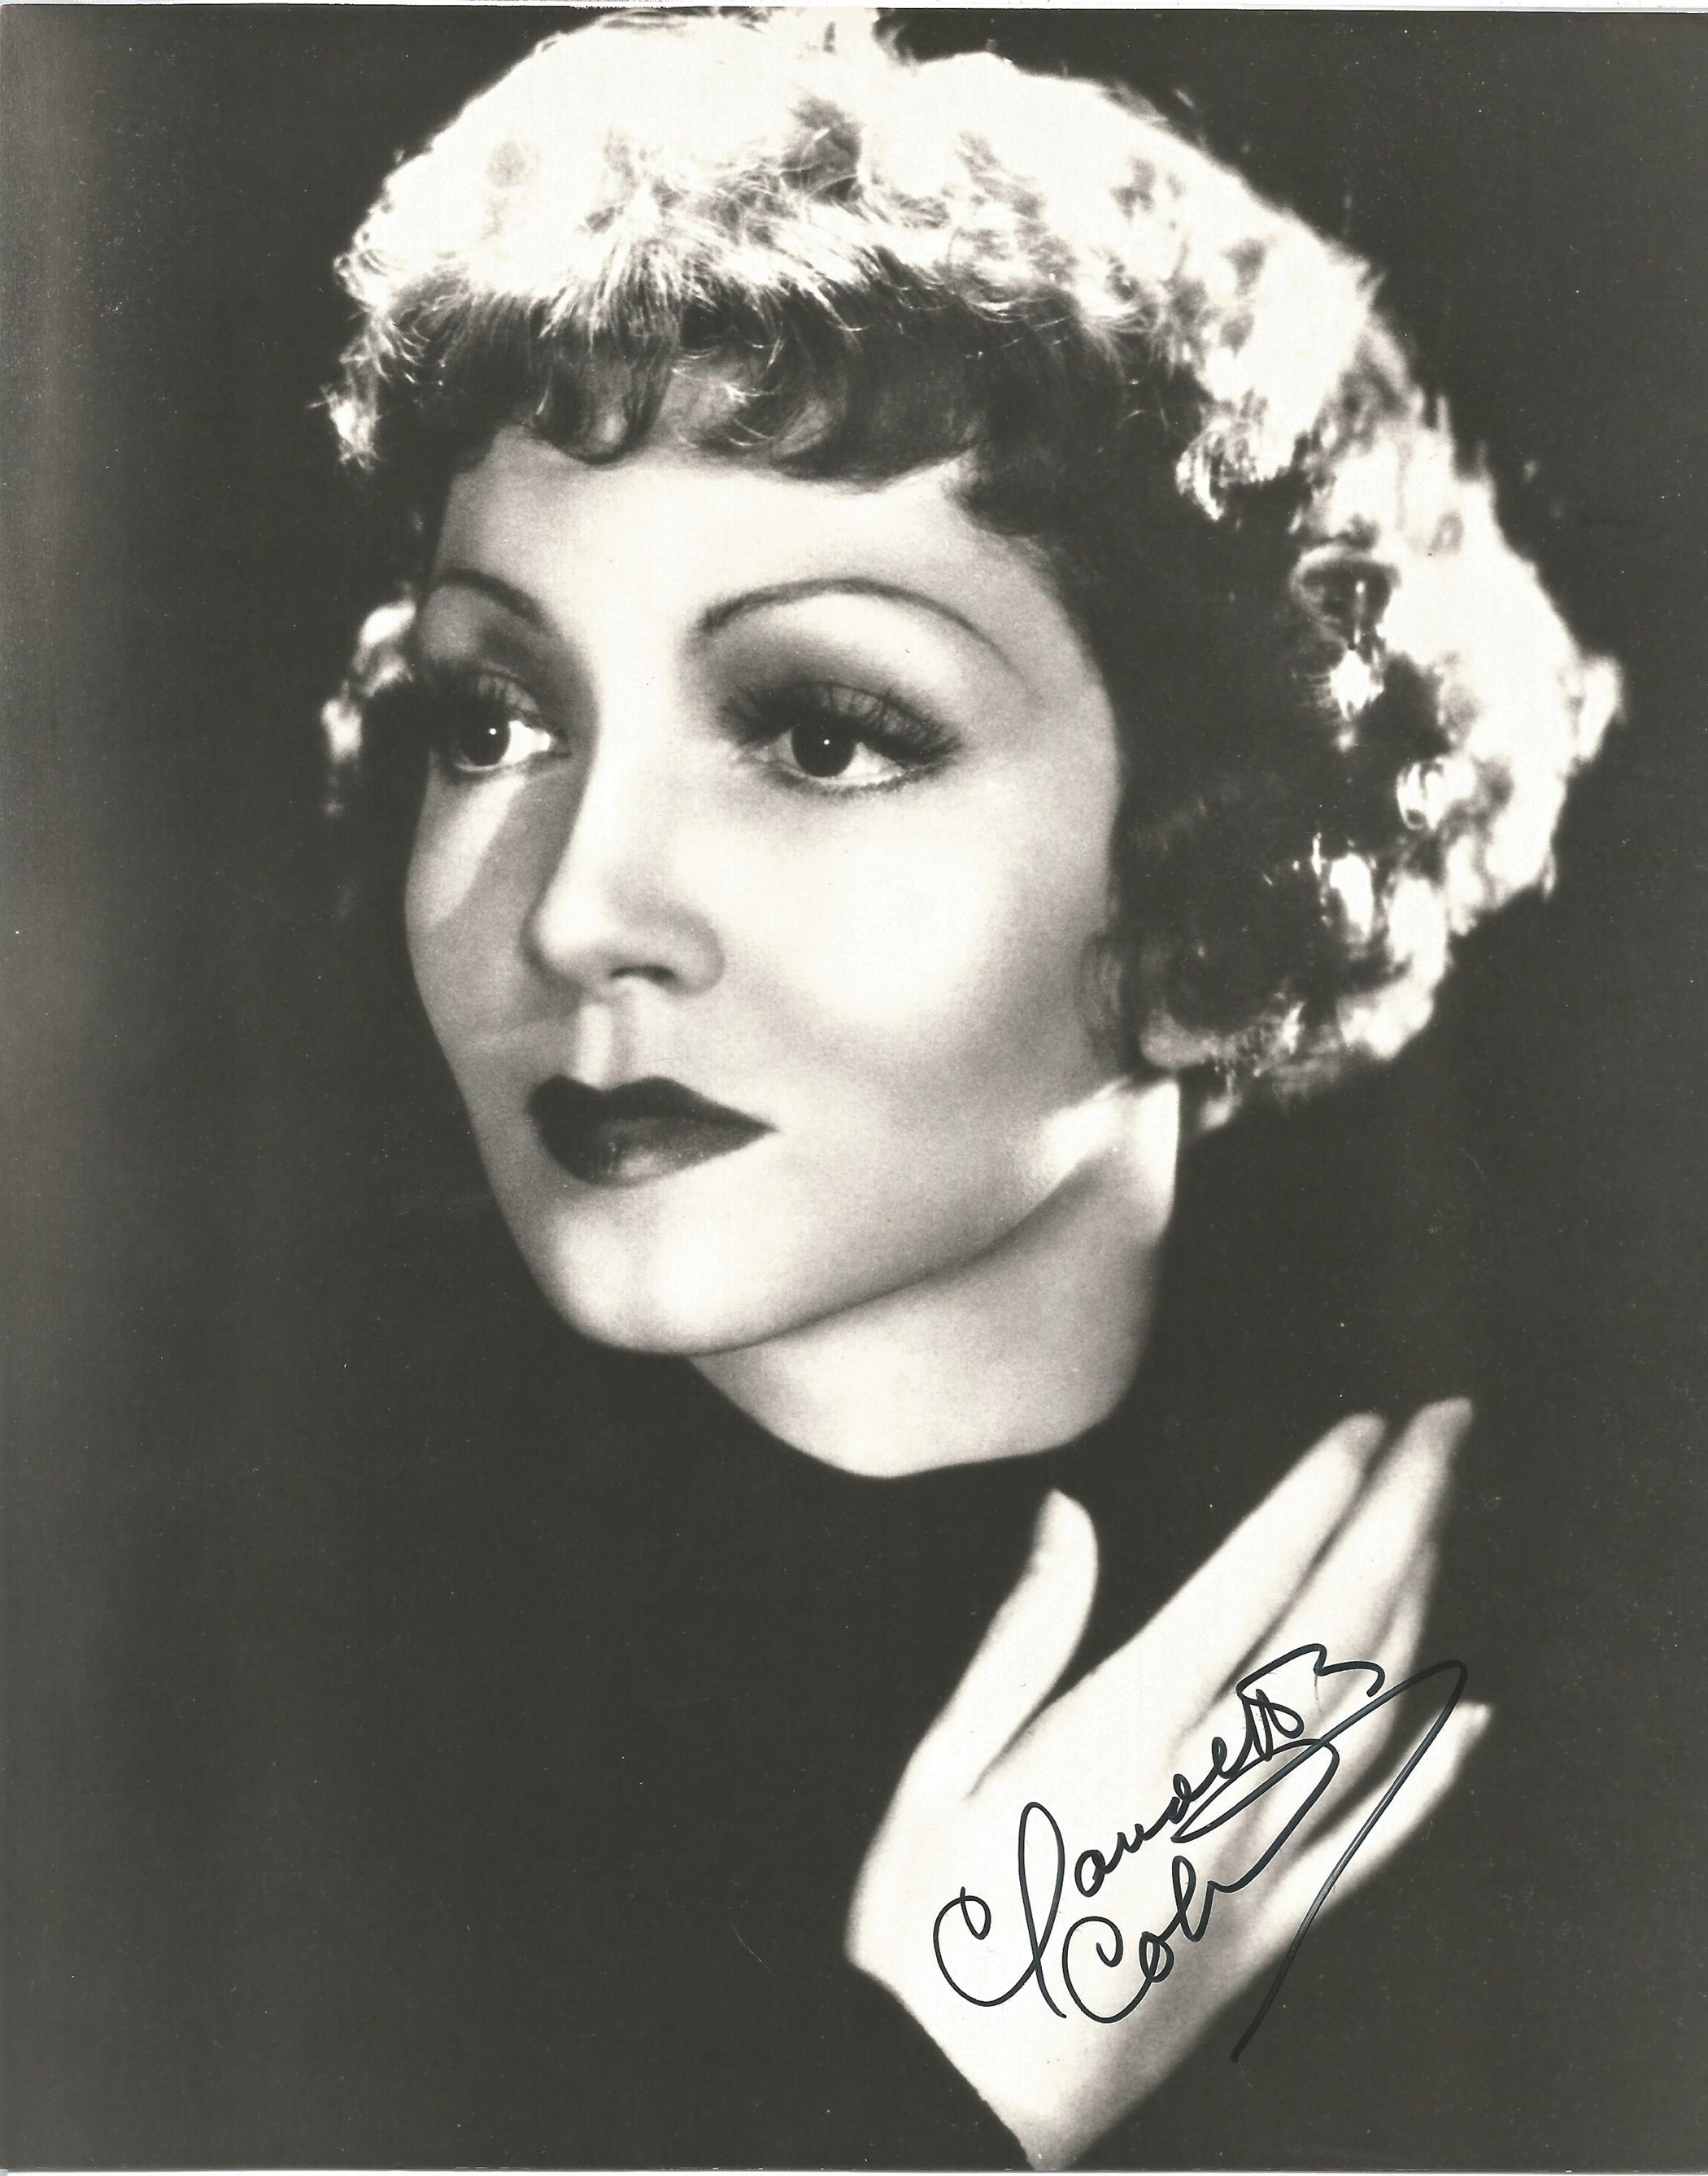 Claudette Colbert signed 10 x 8 inch black and white photo. September 13, 1903 - July 30, 1996 was